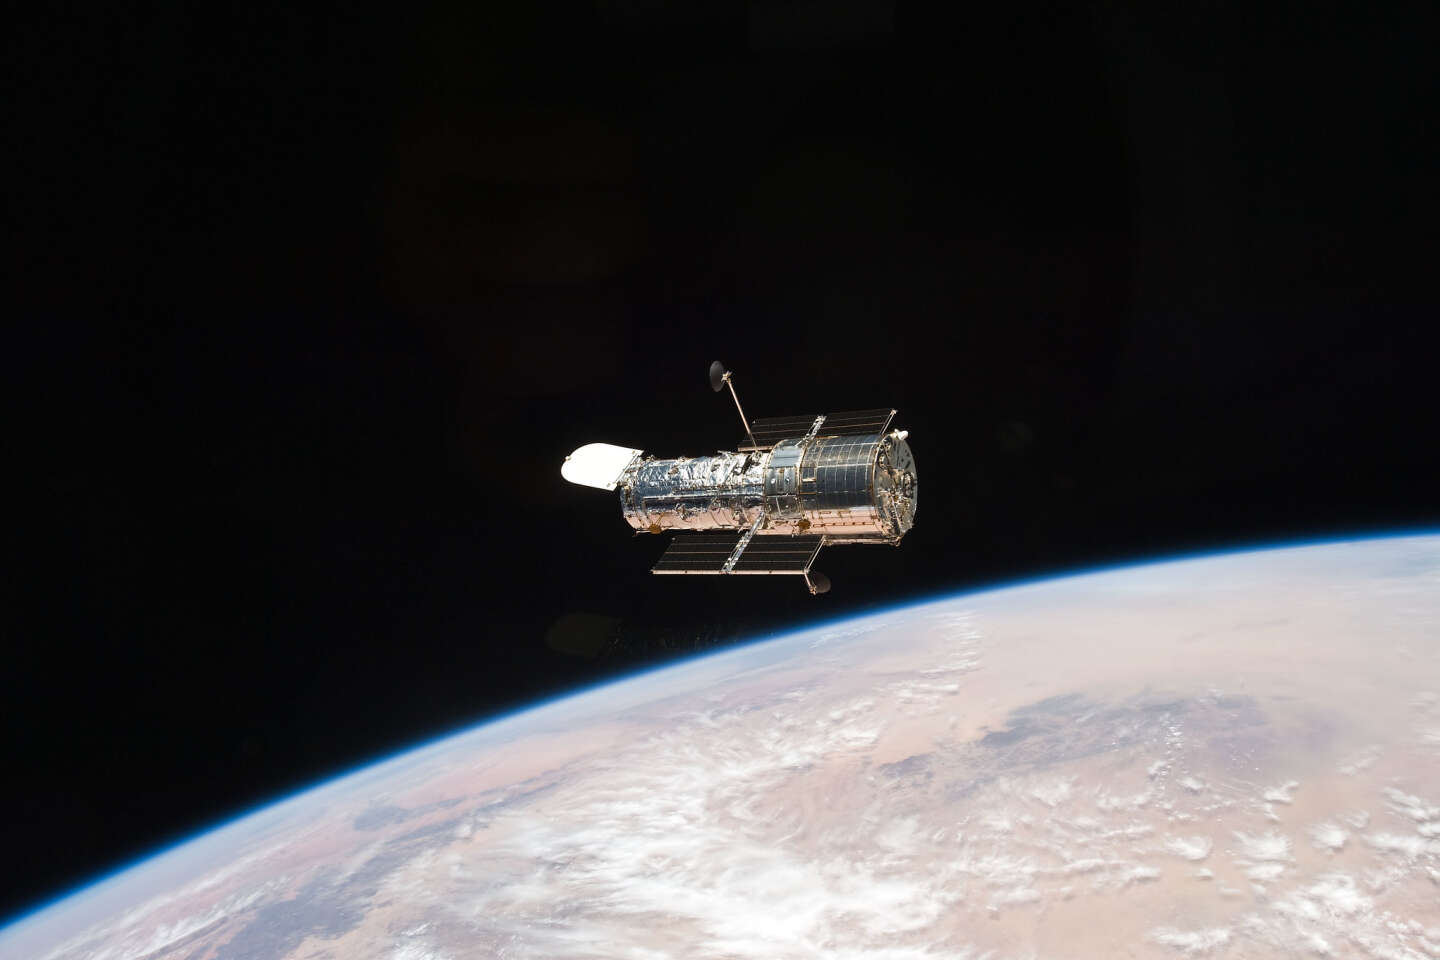 Hubble disturbed by satellite lights